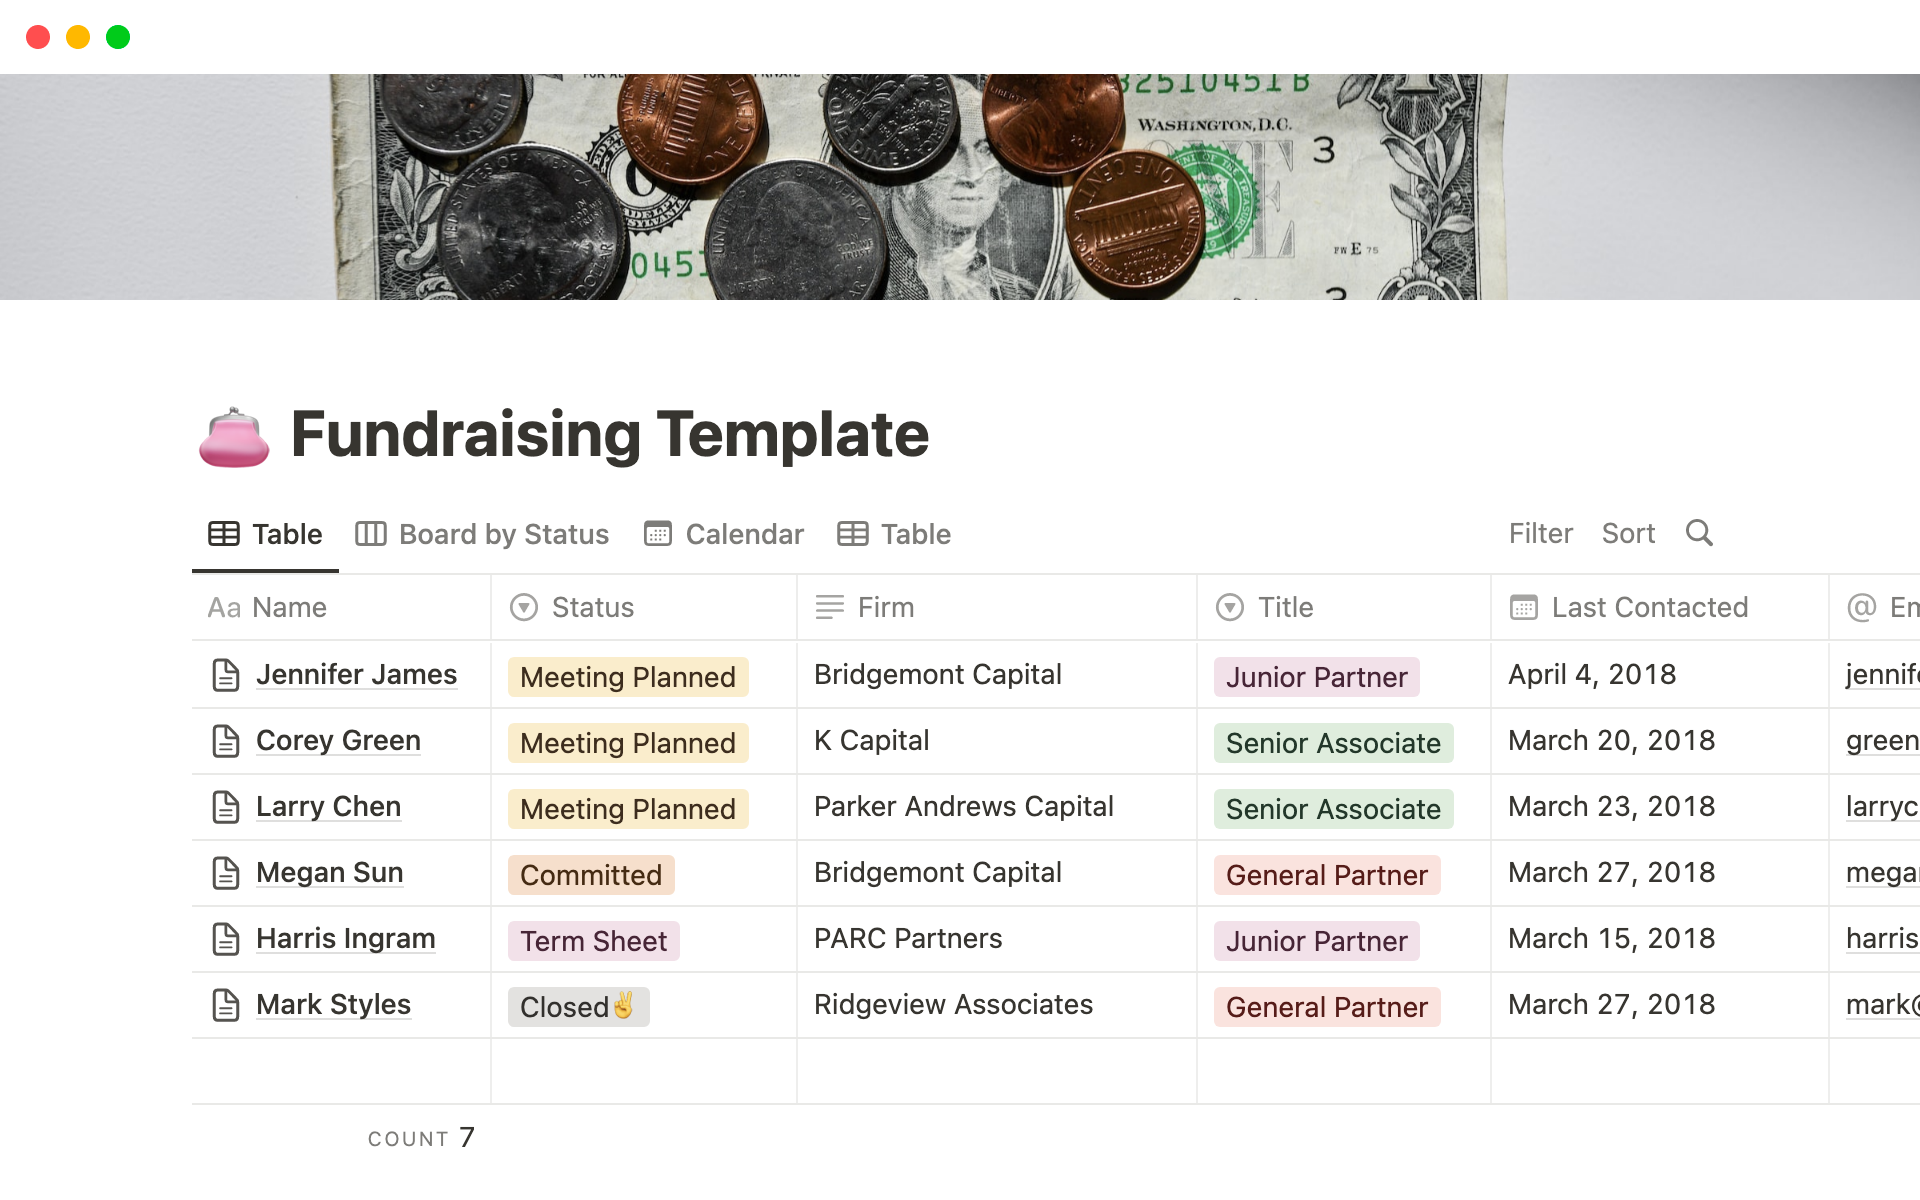 Our template offers a comprehensive solution for managing your fundraising campaign, from tracking donations to organizing volunteers